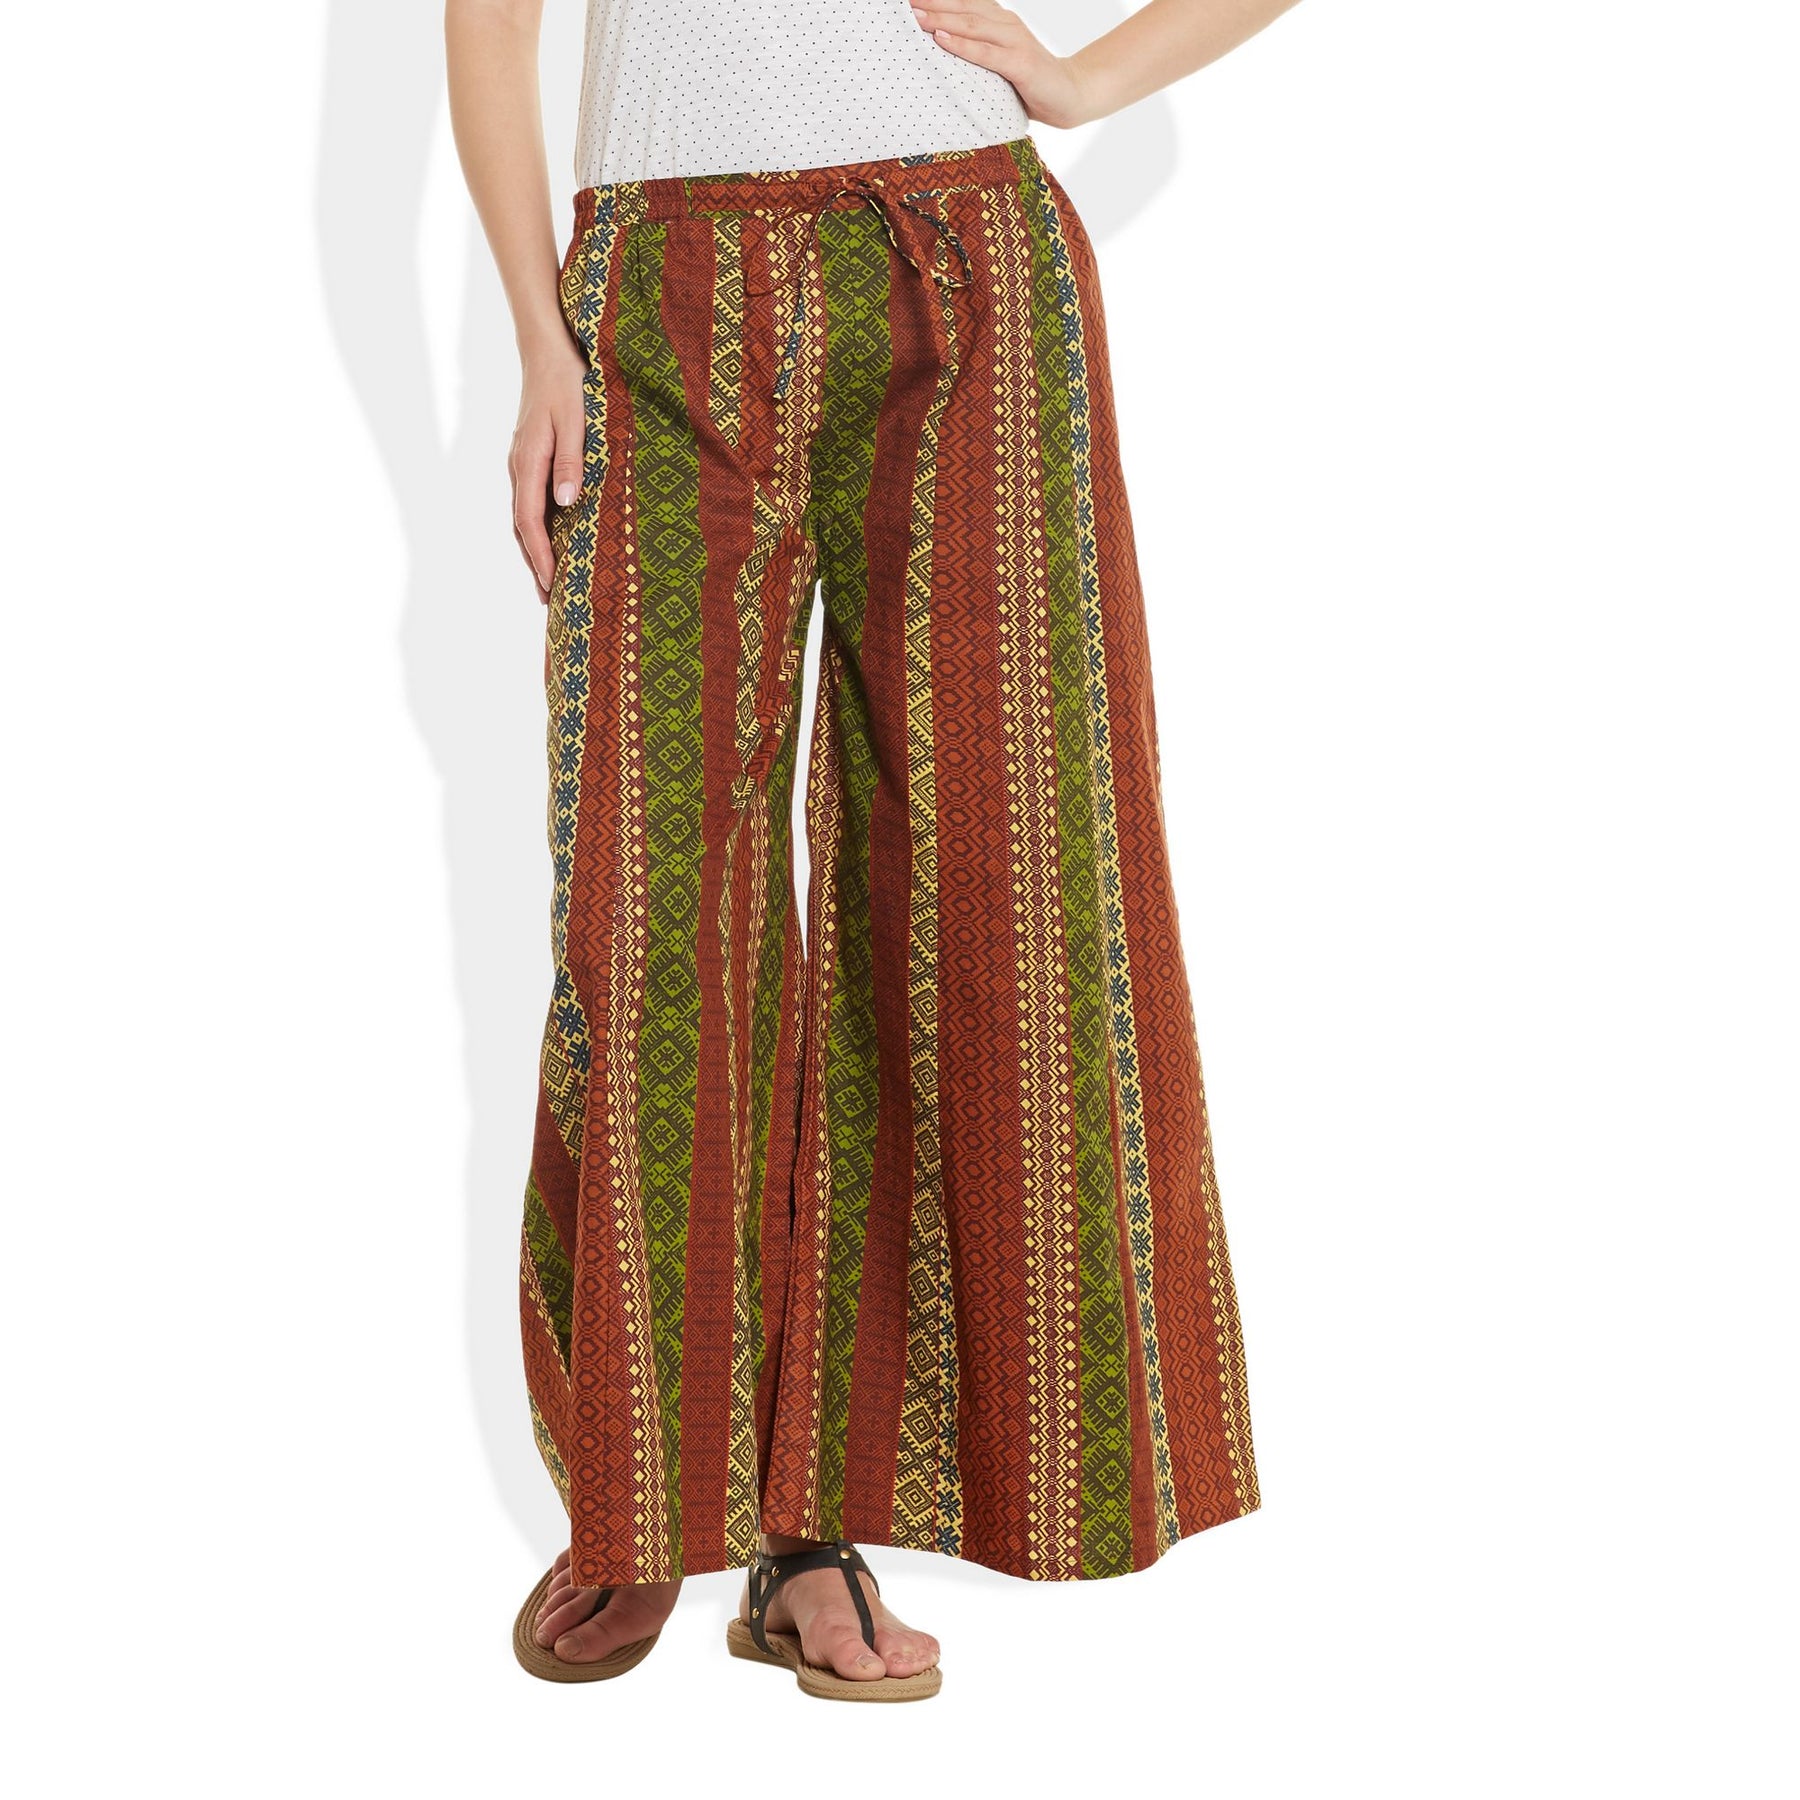 Palazzo Online: Buy Latest Palazzo Pants for Women in India | InWeave